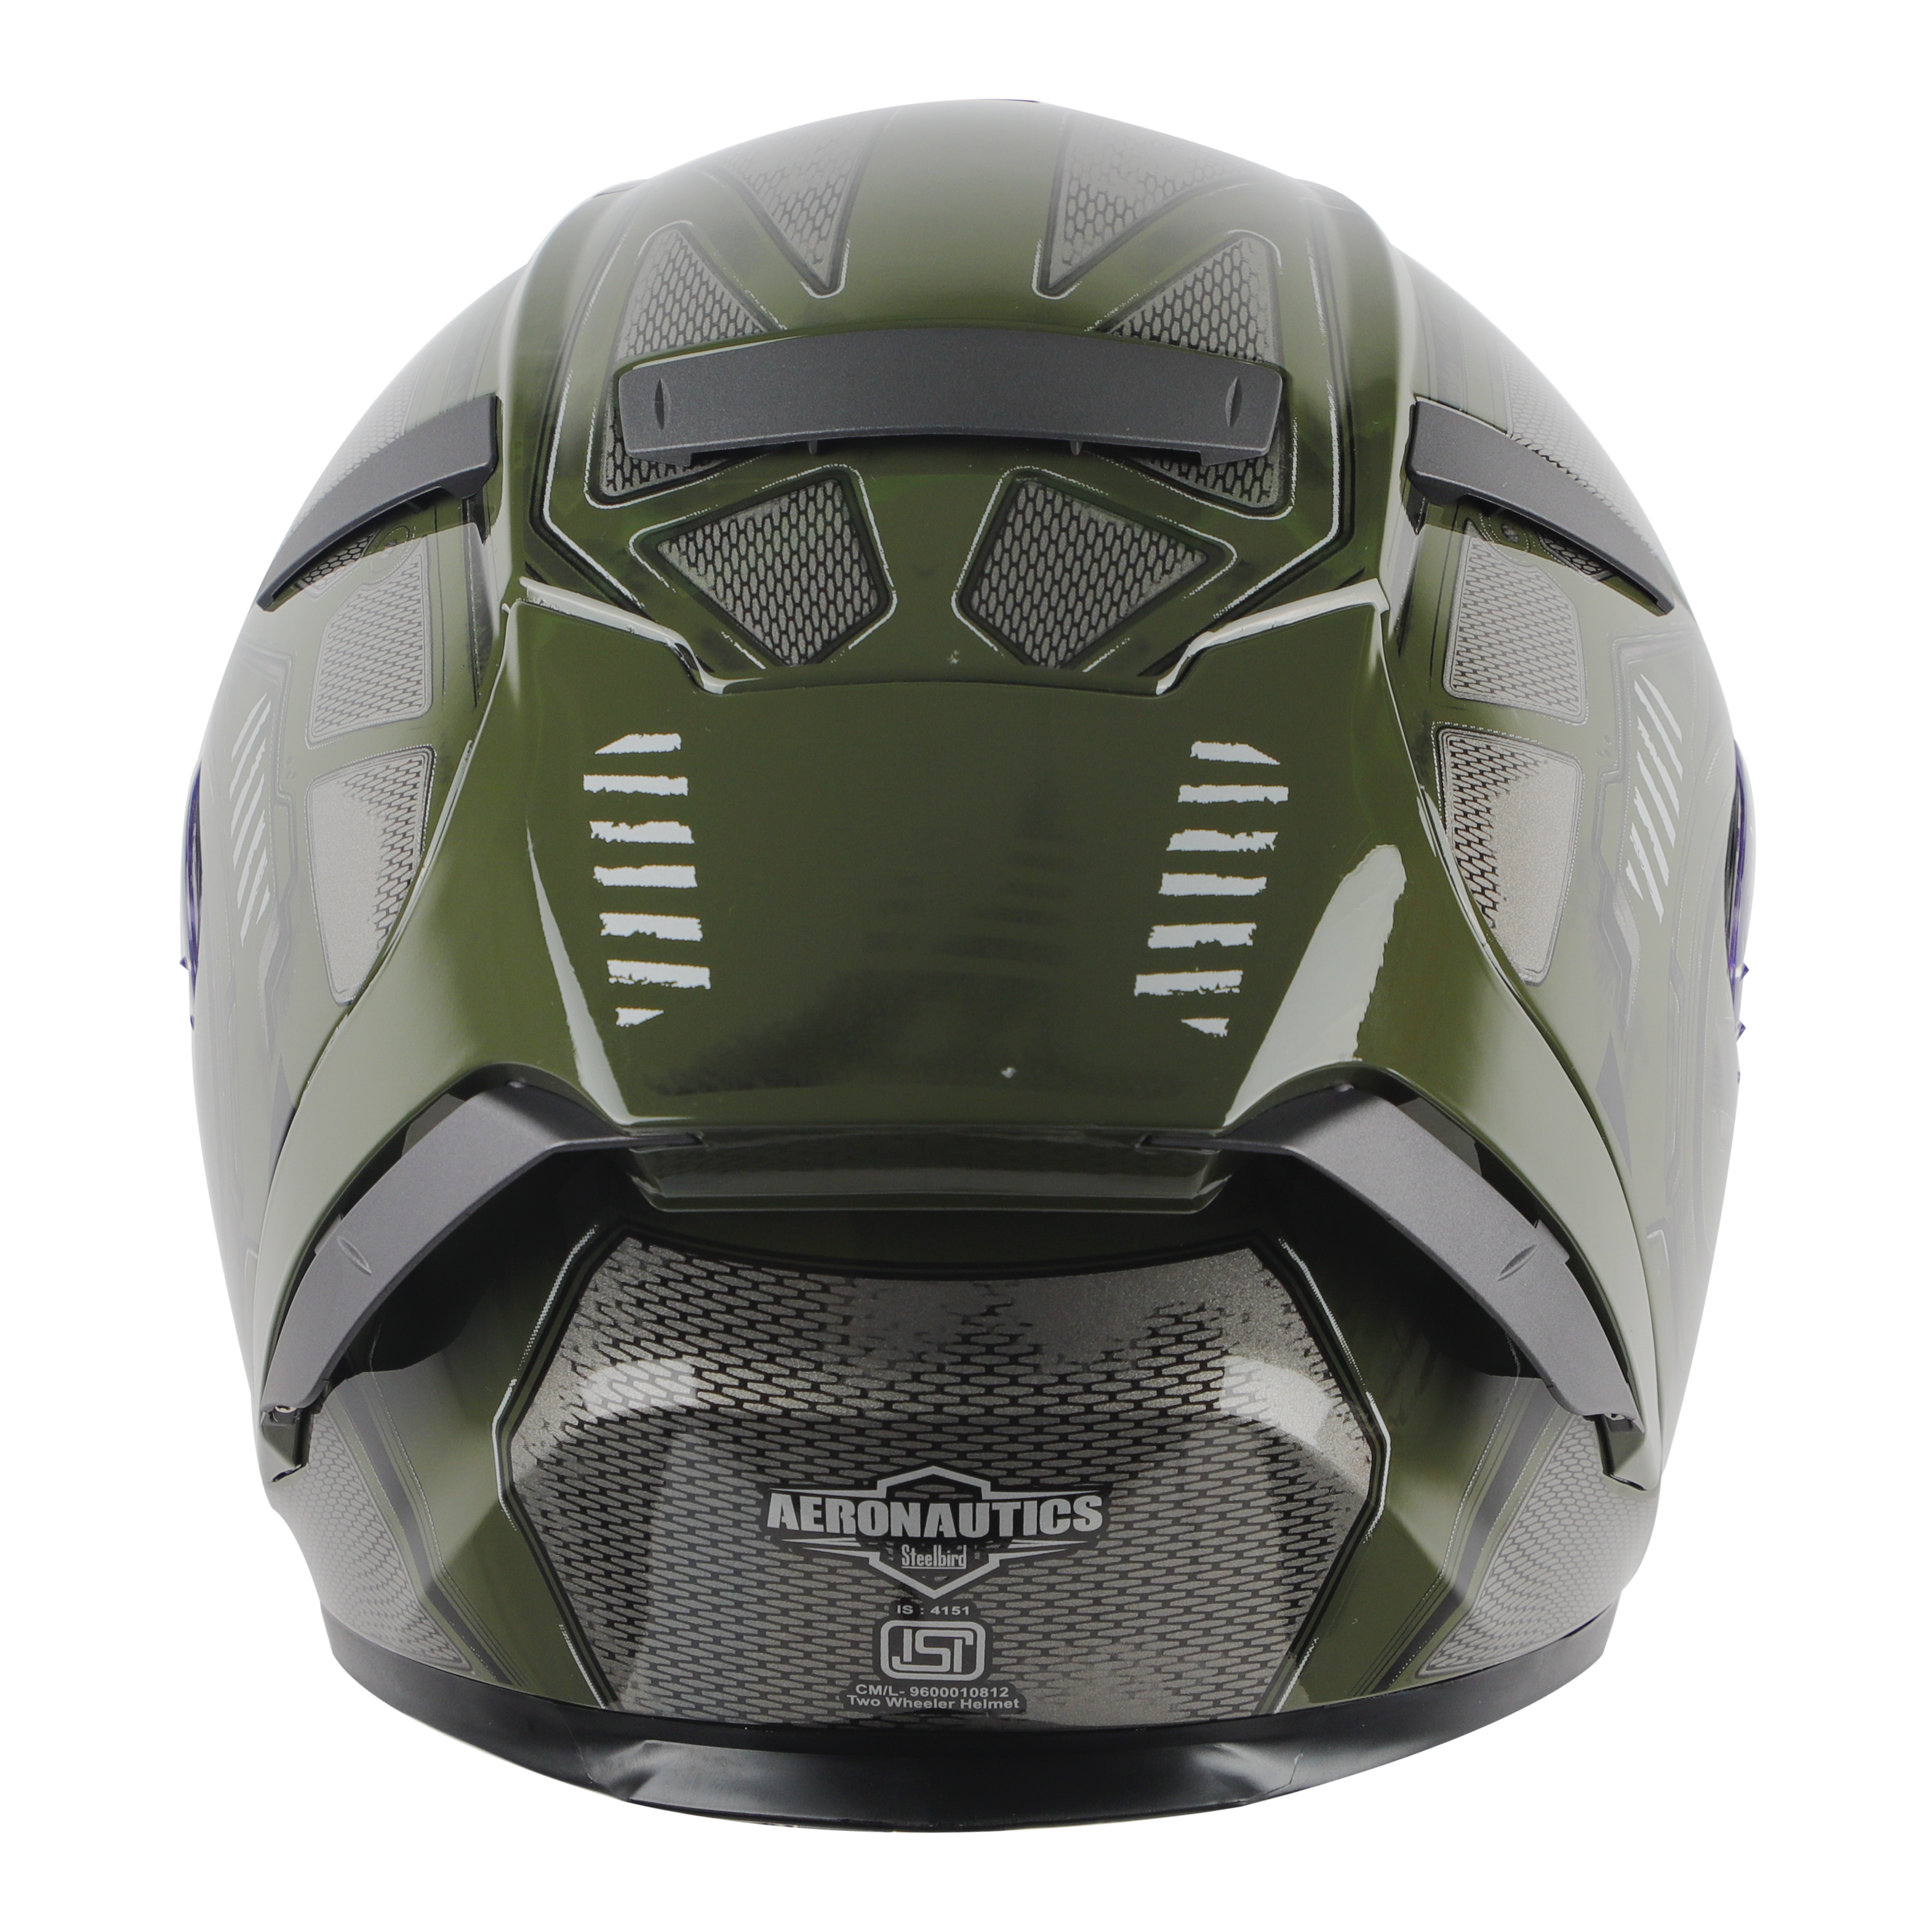 SA-2 GRILL GLOSSY BATTLE GREEN WITH GREY ( FITTED WITH CLEAR VISOR EXTRA GOLD CHROEM VISOR FREE &  WITH ANTI-FOG SHIELD HOLDER)